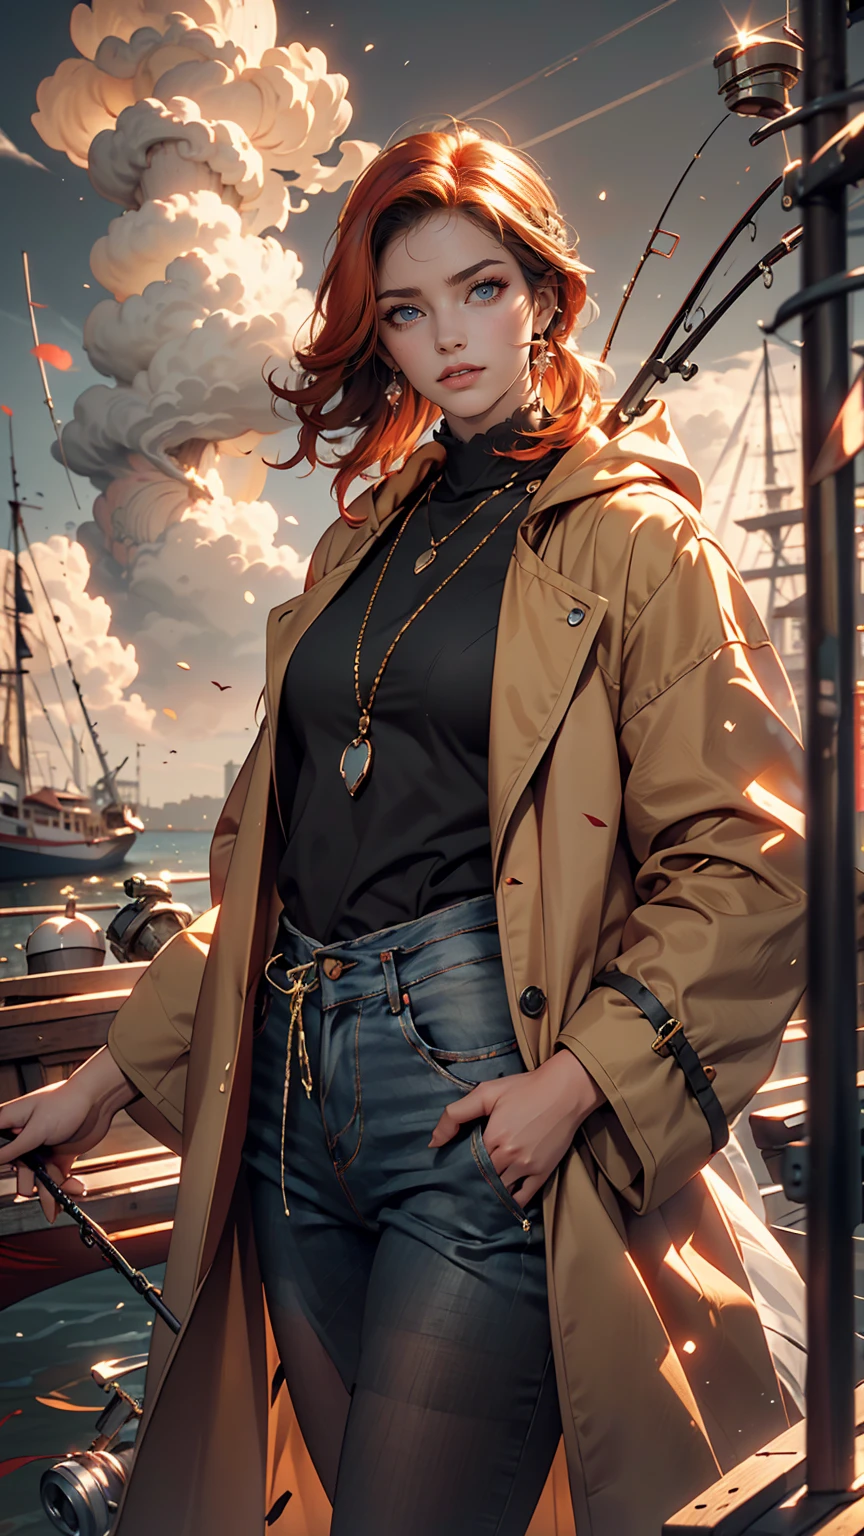 (masterpiece:1.2), highest quality, Beautiful female fisherman photo, Redhead, 40 years old, Wearing a yellow raincoat,  (On a fishing boat:1.3),  Dark Clouds, PhotoRealistic, HyperRealistic, Ultra-detailed, Analog Style, bent at the waist, Modest, Low Cut, Detailed skin, Matte skin, Soft lighting, Scattered beneath the surface, Realistic, Dark Shadows, masterpiece, highest quality, ultra Realistic, 8k, Golden Ratio, complicated, High detail, Film Photography, Soft Focus